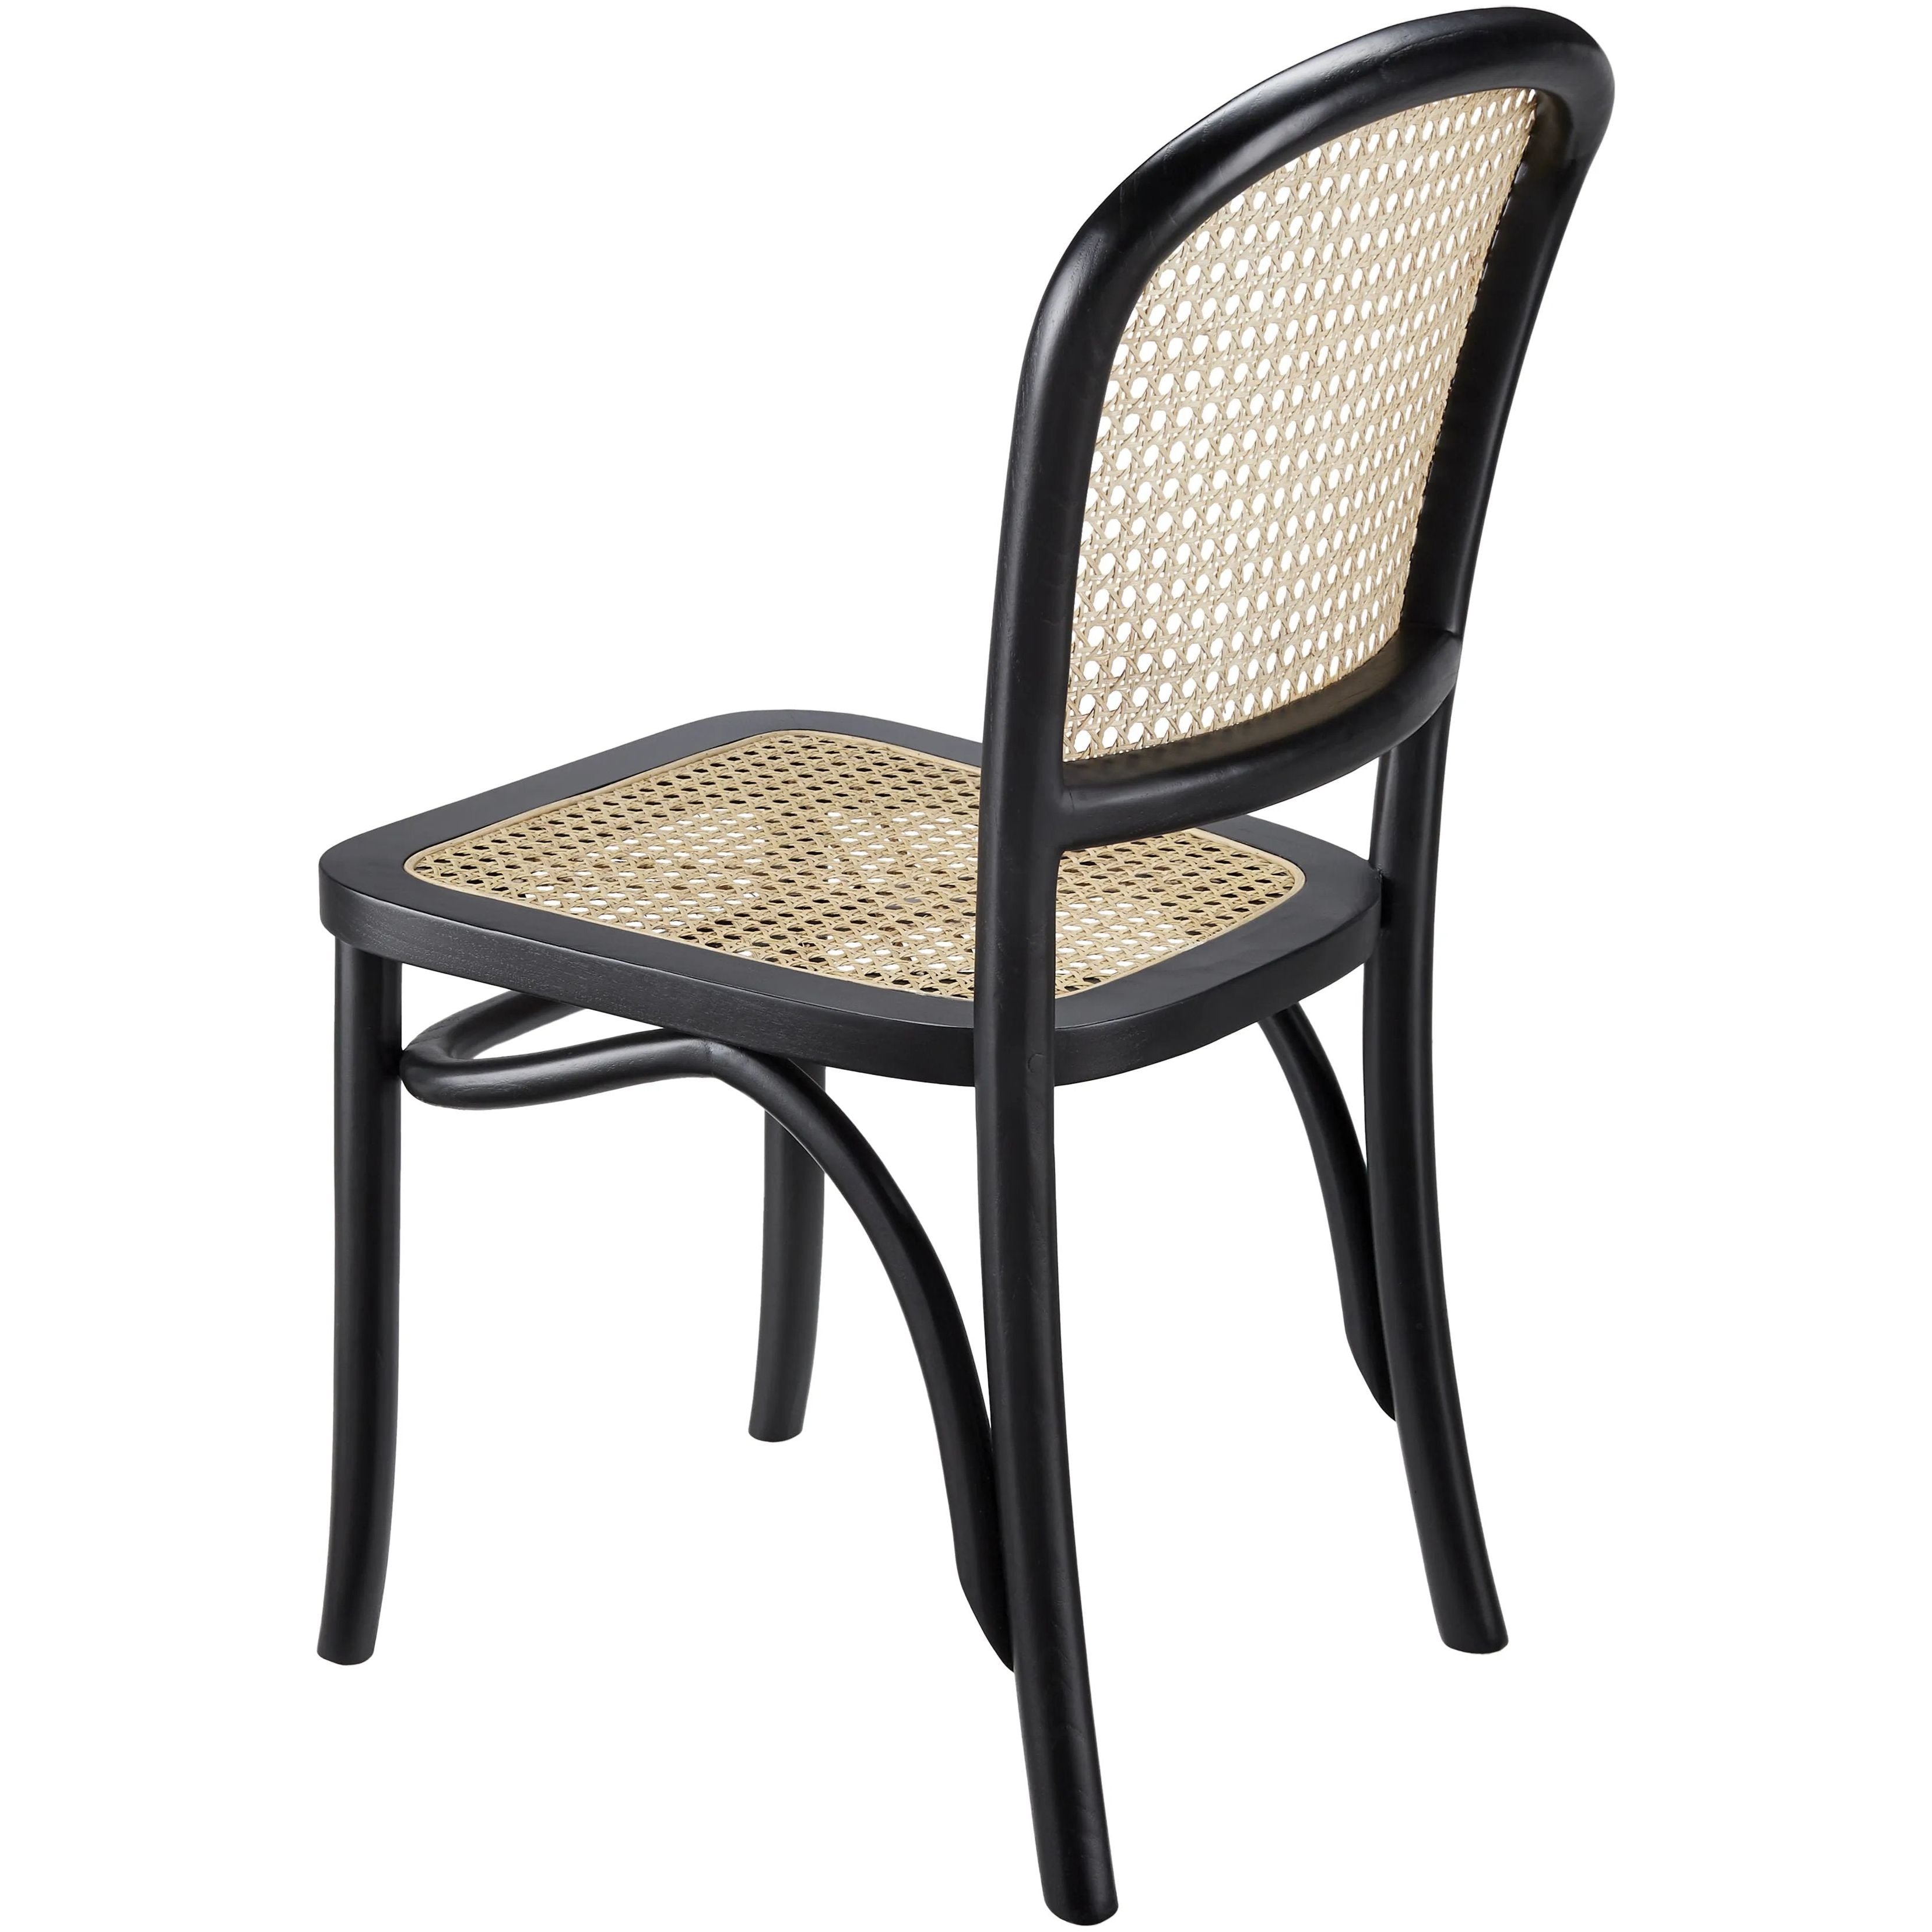 Introduce a taste of the past into your home with our Yumen Dining Chair. Embodying a blend of mid-century modern style and exotic materials, this unique piece will transform any space into an inviting dining area. The seat is made from intricately woven rattan, providing comfort while adding a touch of natural beauty. Amethyst Home provides interior design, new home construction design consulting, vintage area rugs, and lighting in the Tampa metro area.